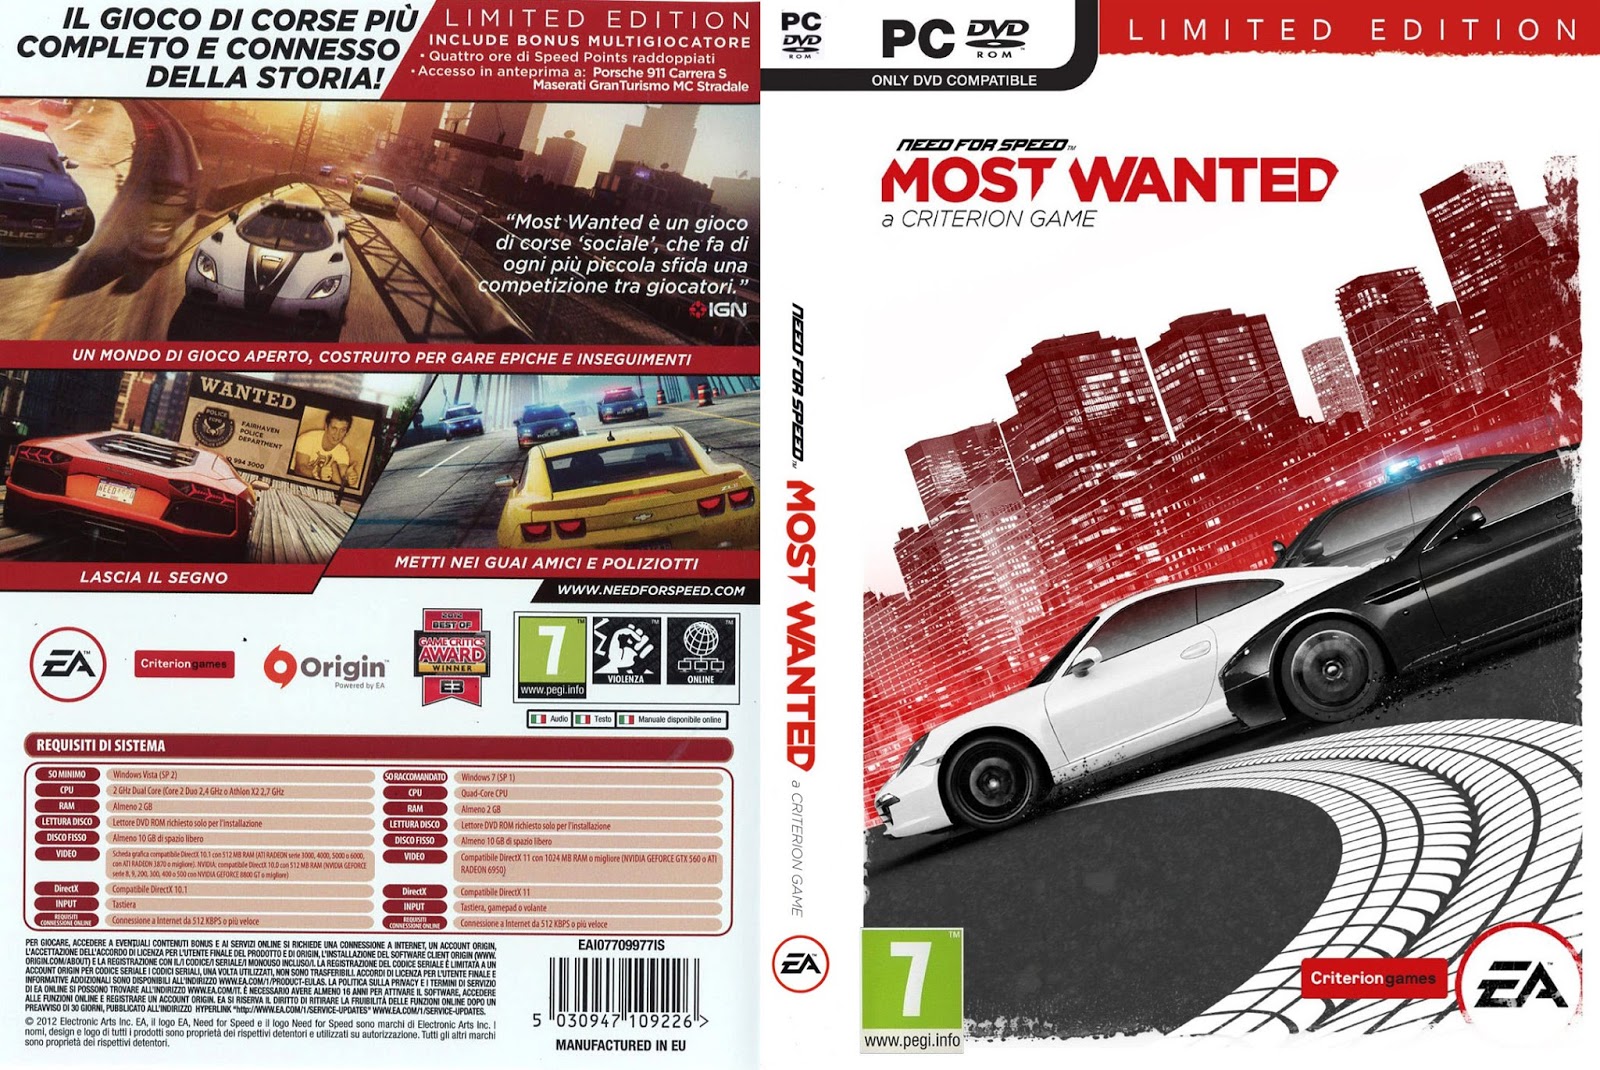 cara most wanted pc